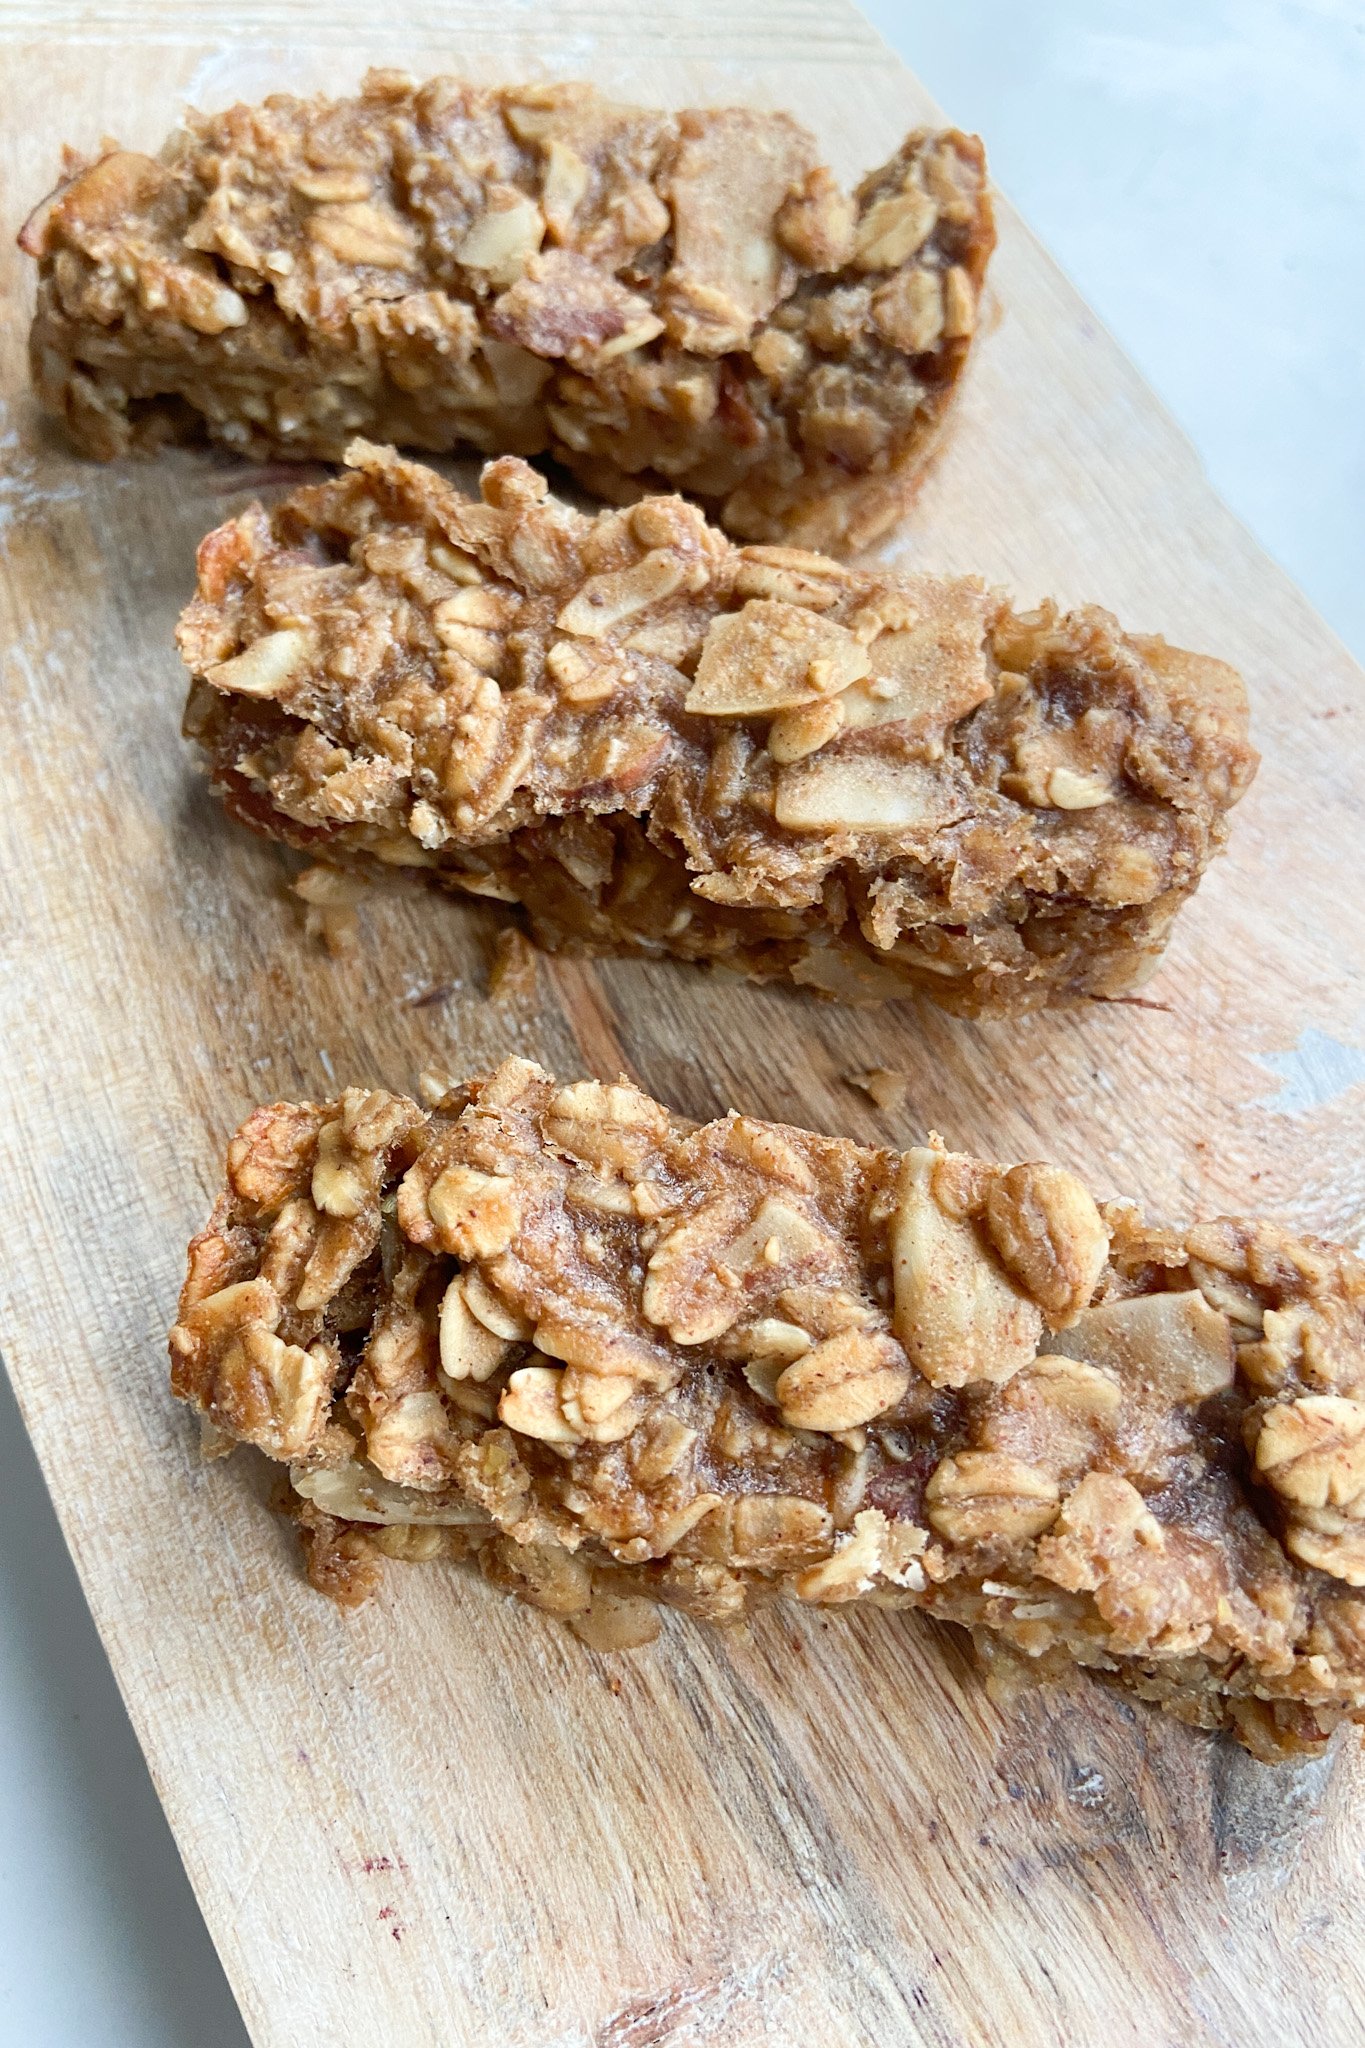 Peanut butter and banana granola bars served on a wooden cutting board